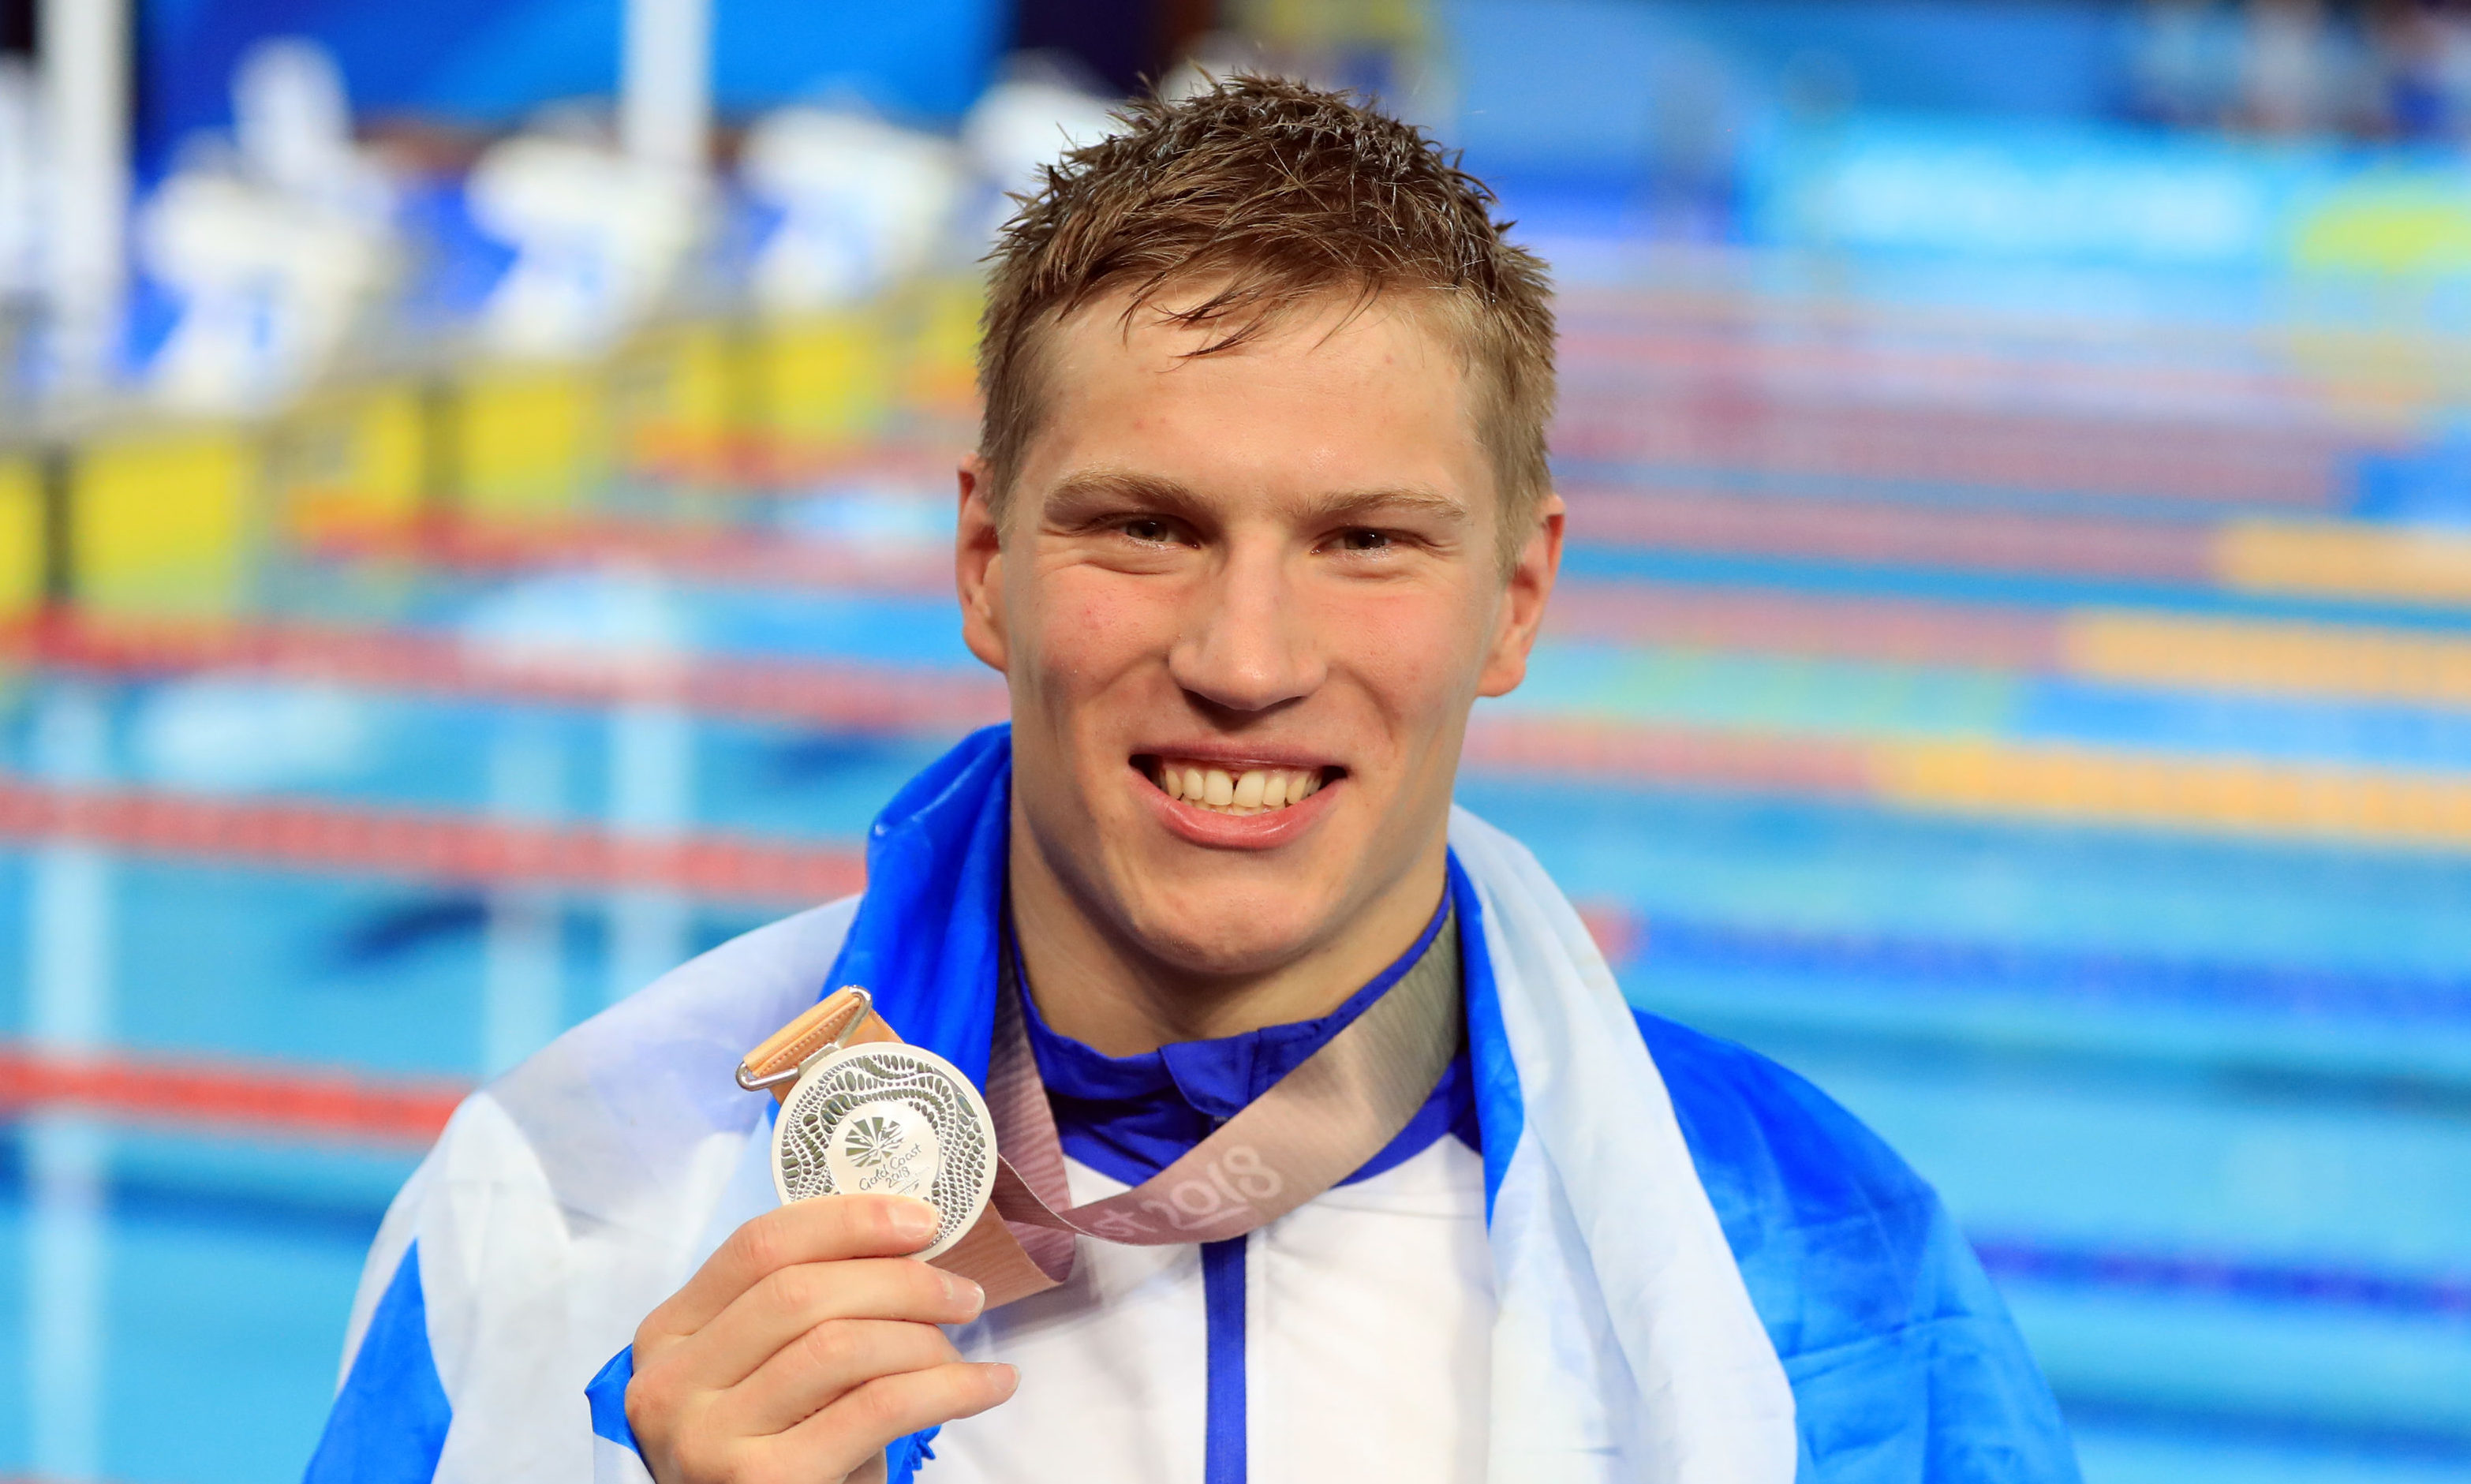 Glenrothes swimmer Mark Szaranek with his silver medal